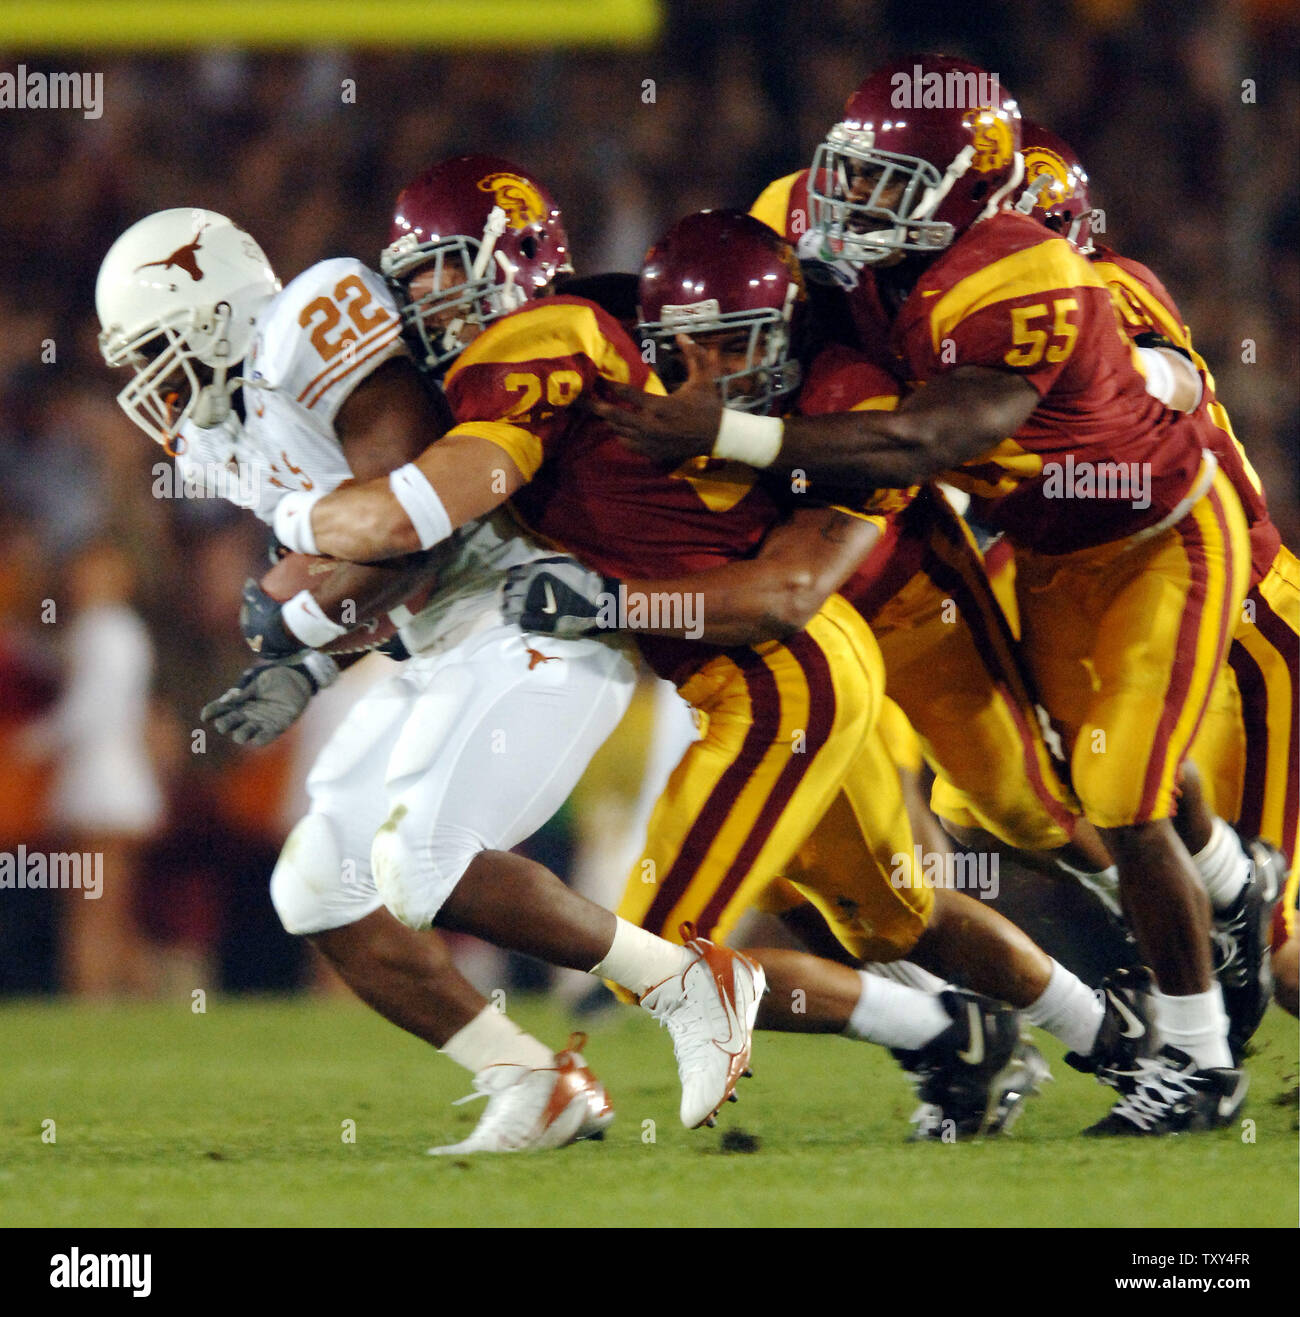 University of Texas running back Selvin Young (#22) is thrown for a loss on  the fourth and one by University of Southern California defense during  first quarter action of the 92nd Rose